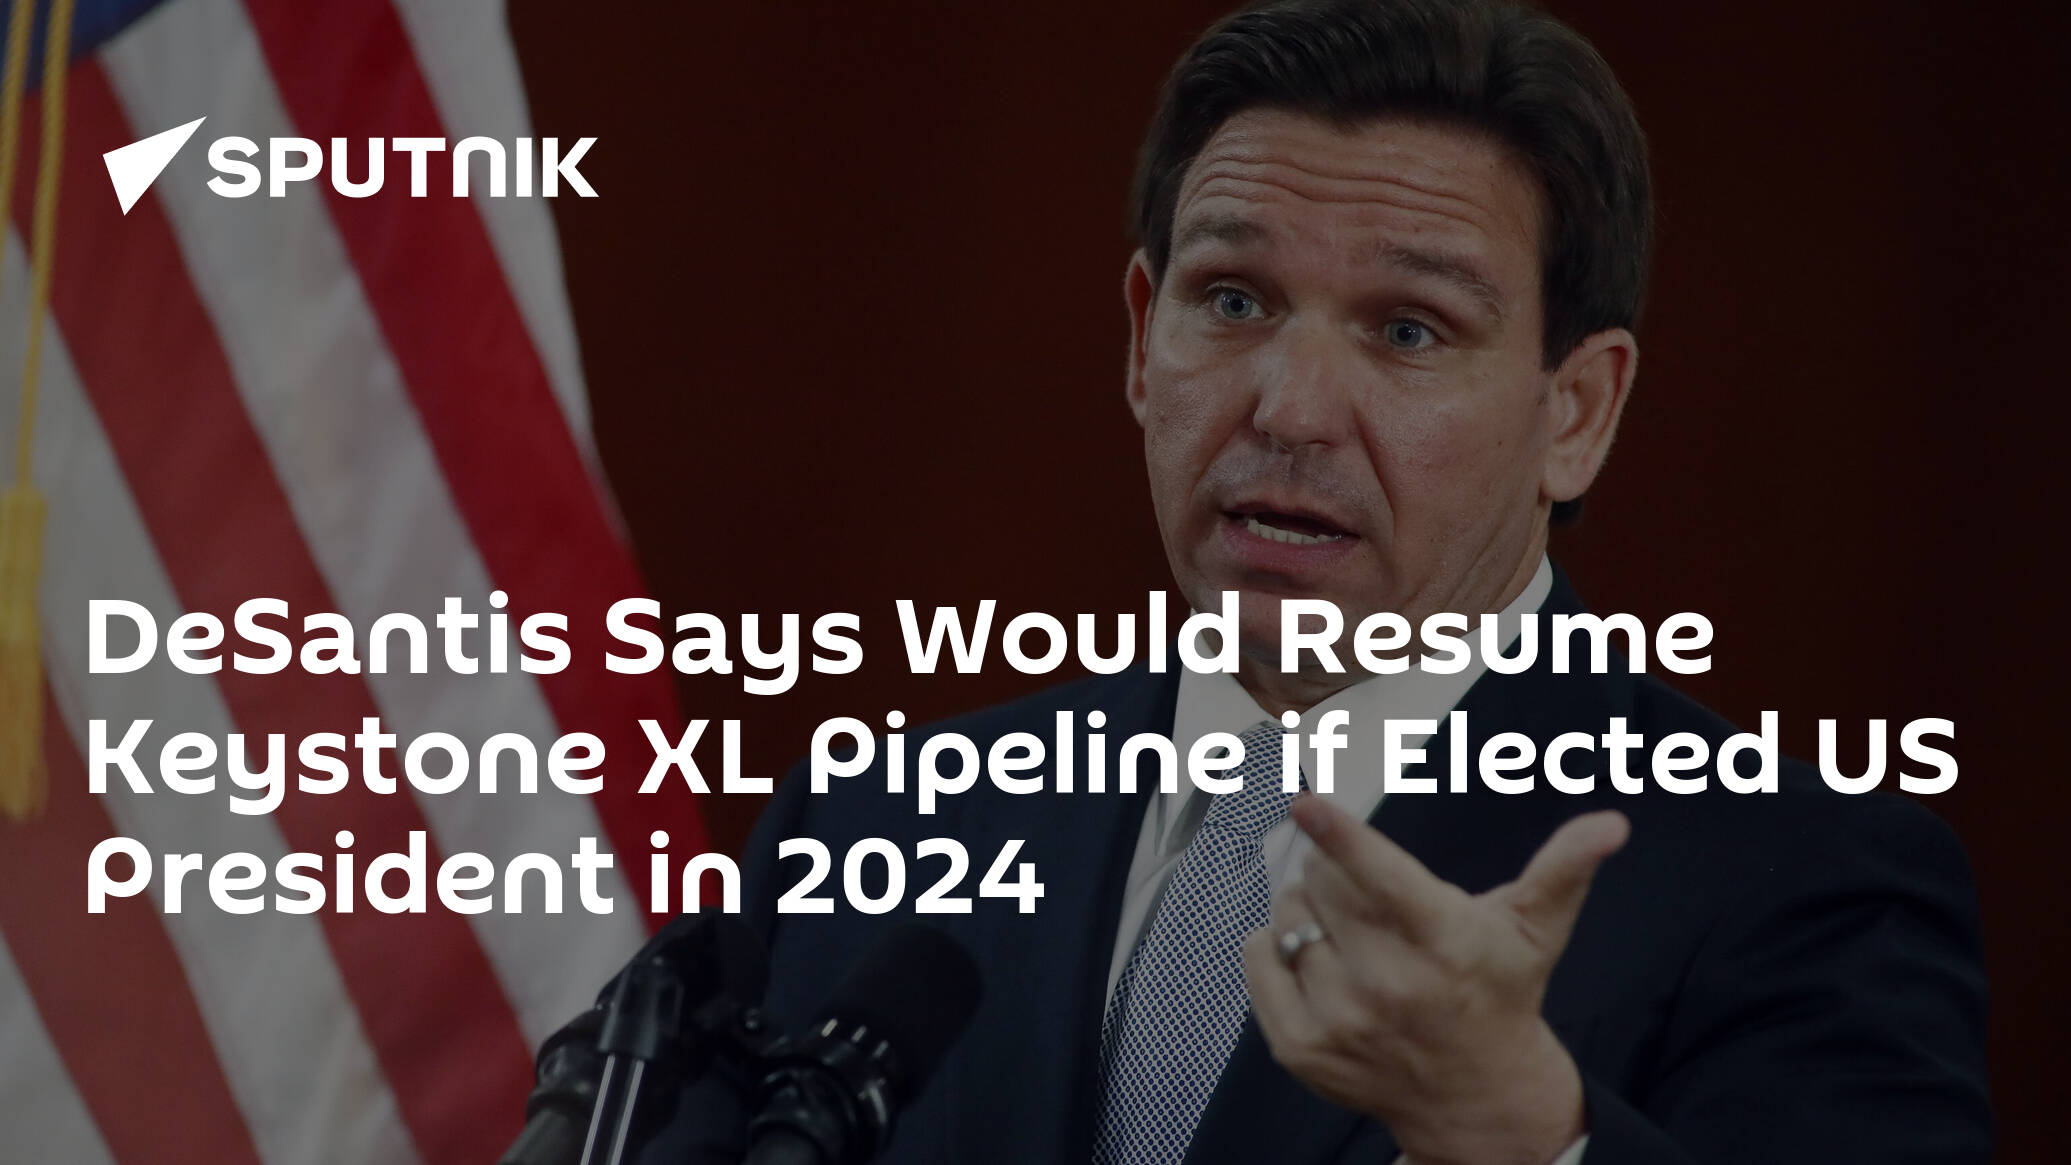 DeSantis Says Would Resume Keystone XL Pipeline if Elected US President in 2024